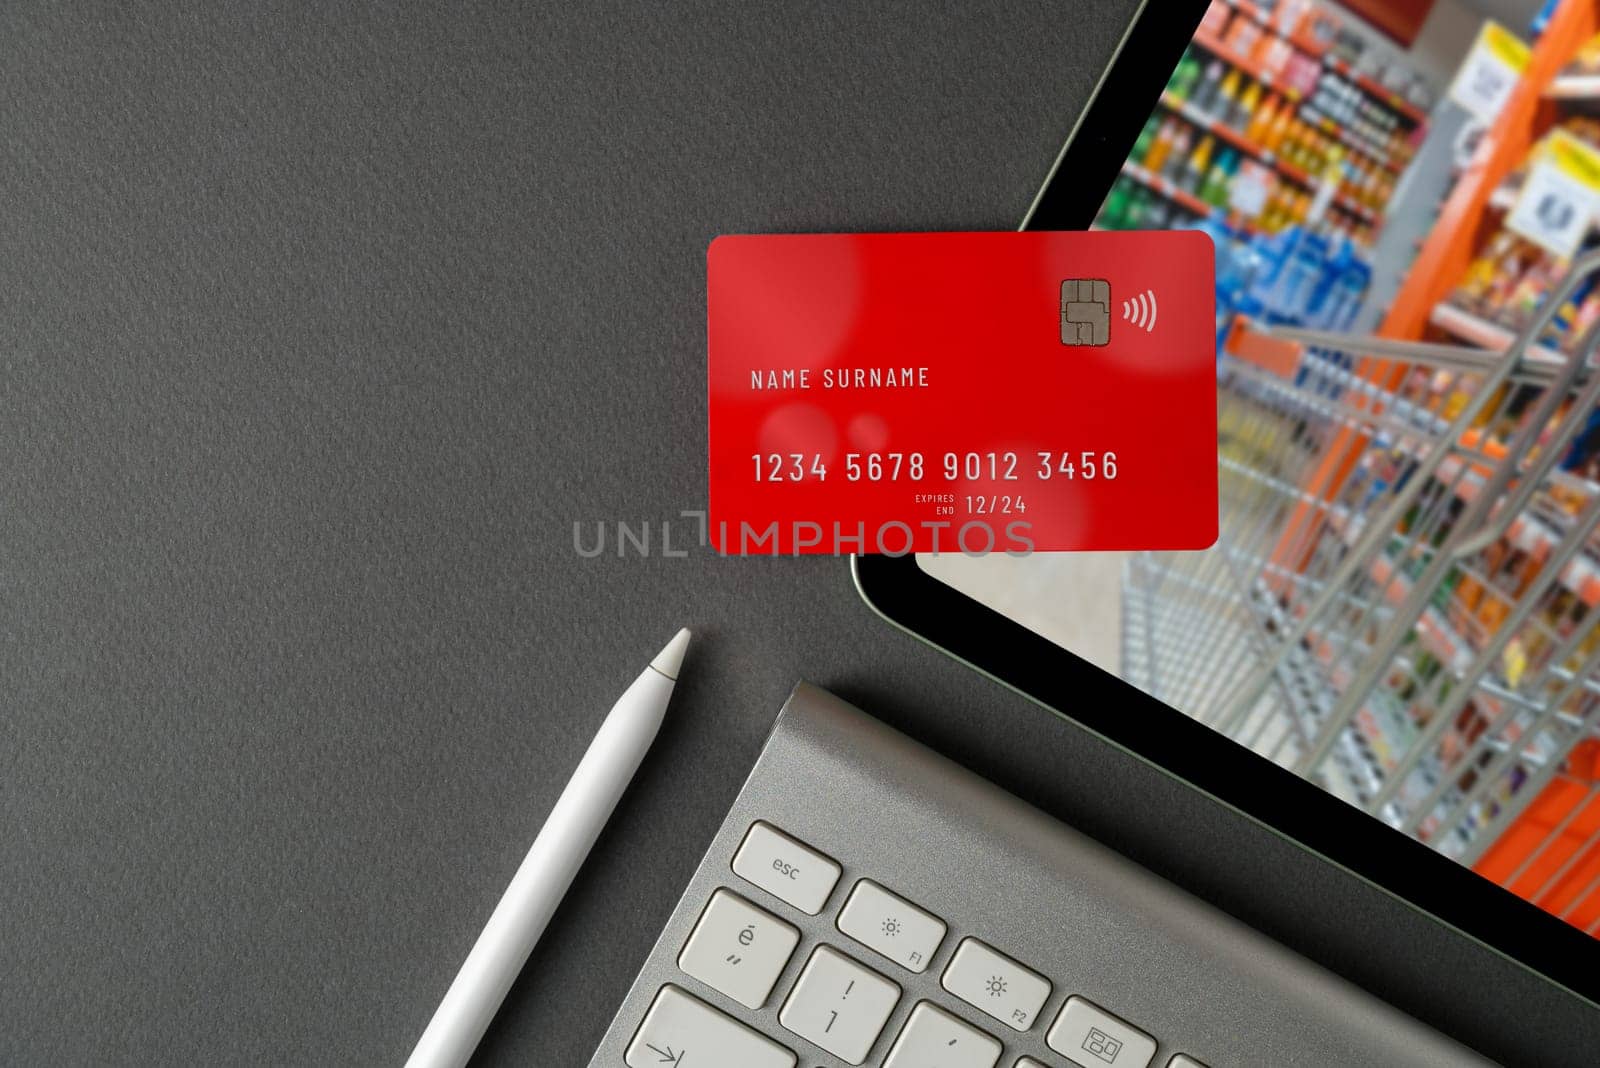 The credit card lies on the tablet and there is a blurry image of the supermarket on the tablet screen